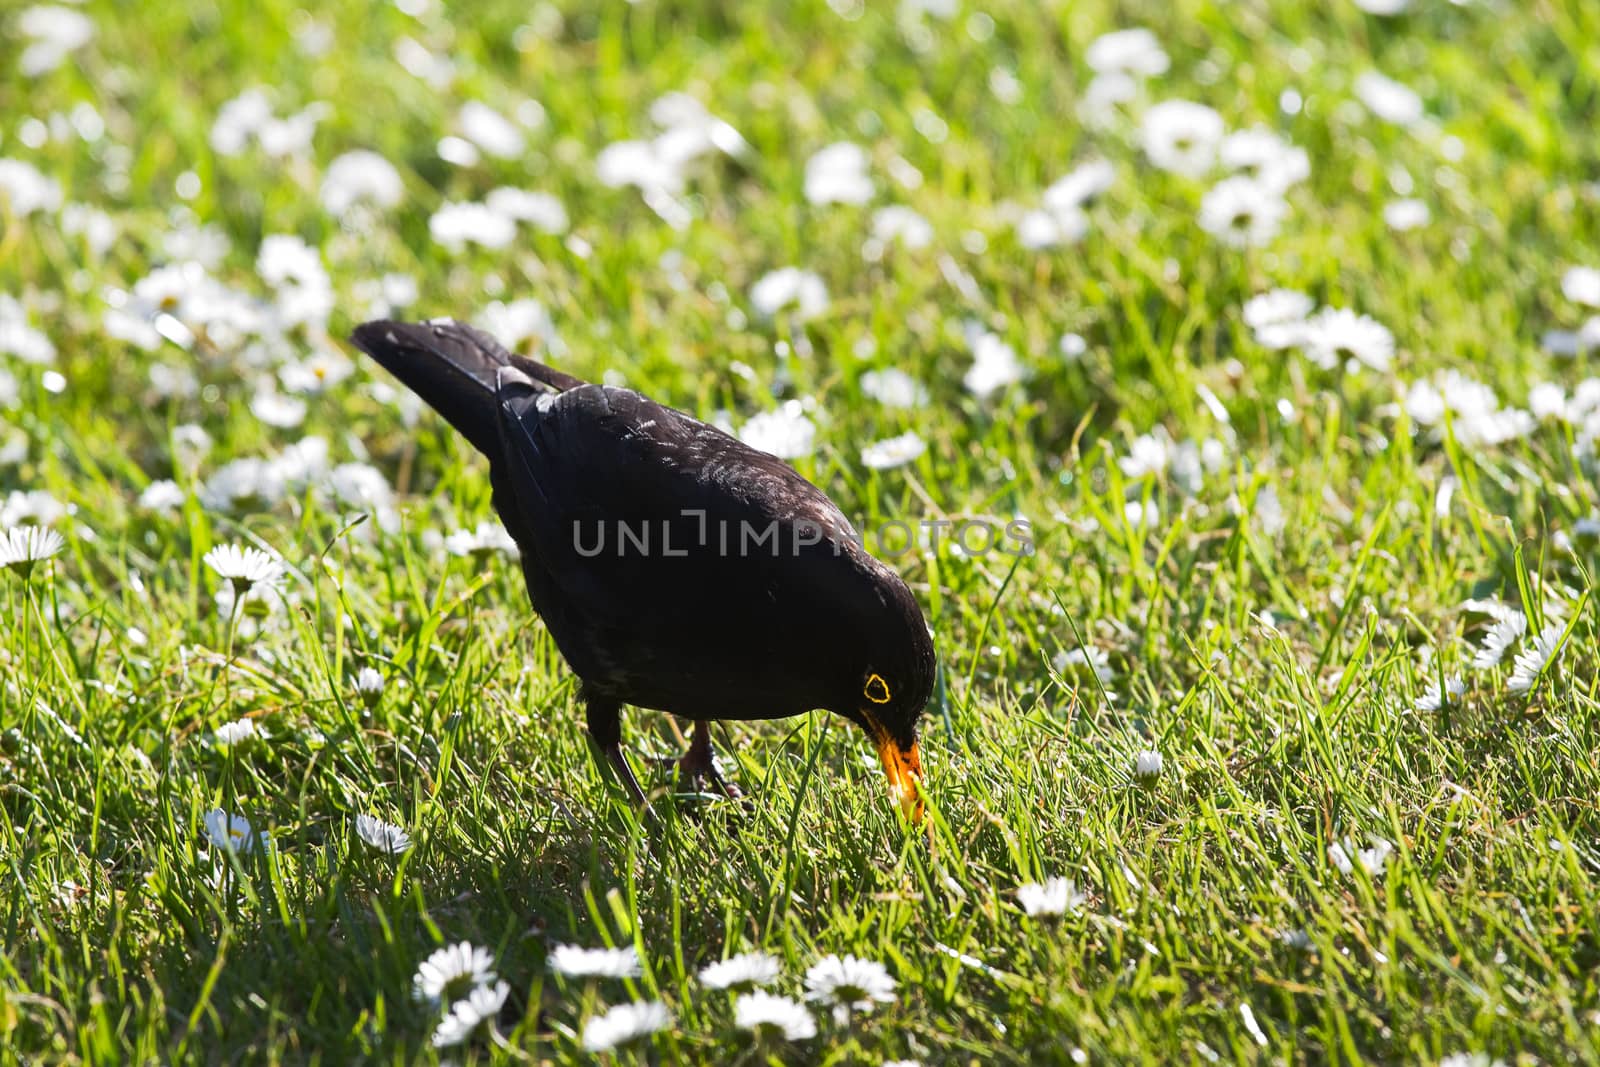 Male Blackbird searching food to feed nestlings or baby birds on evening in spring